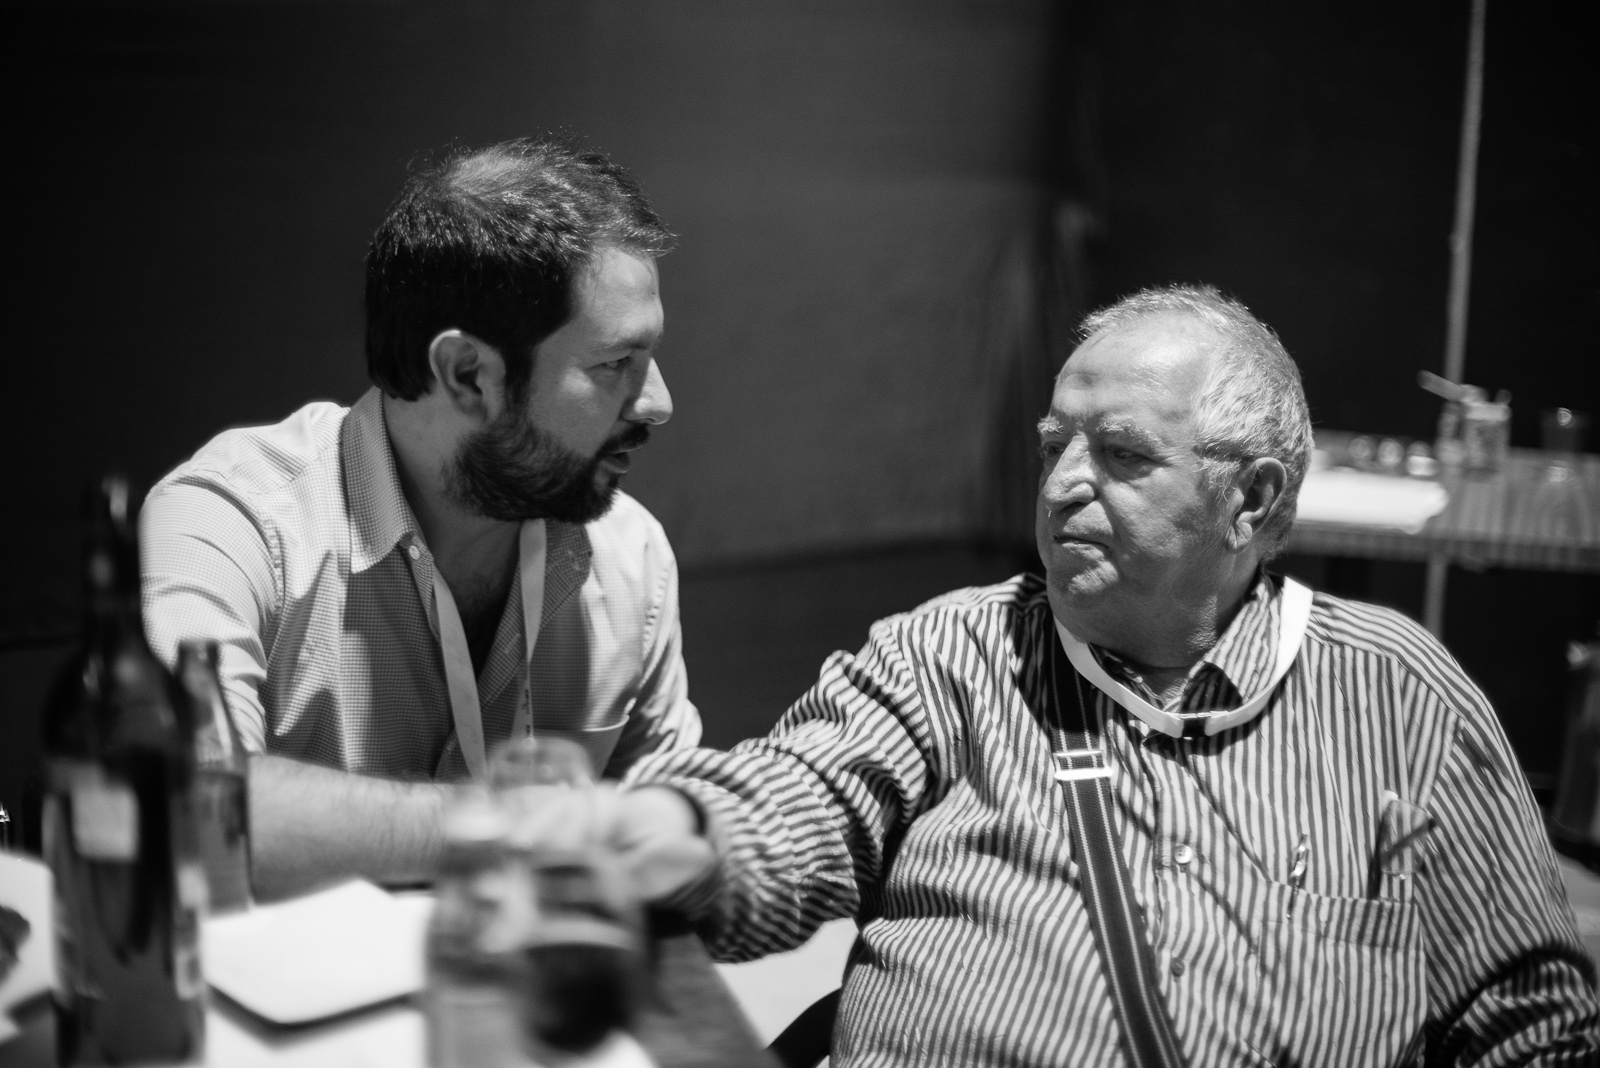 Chefs Enrique Olvera and Juan Mari Arzak discussing the role of